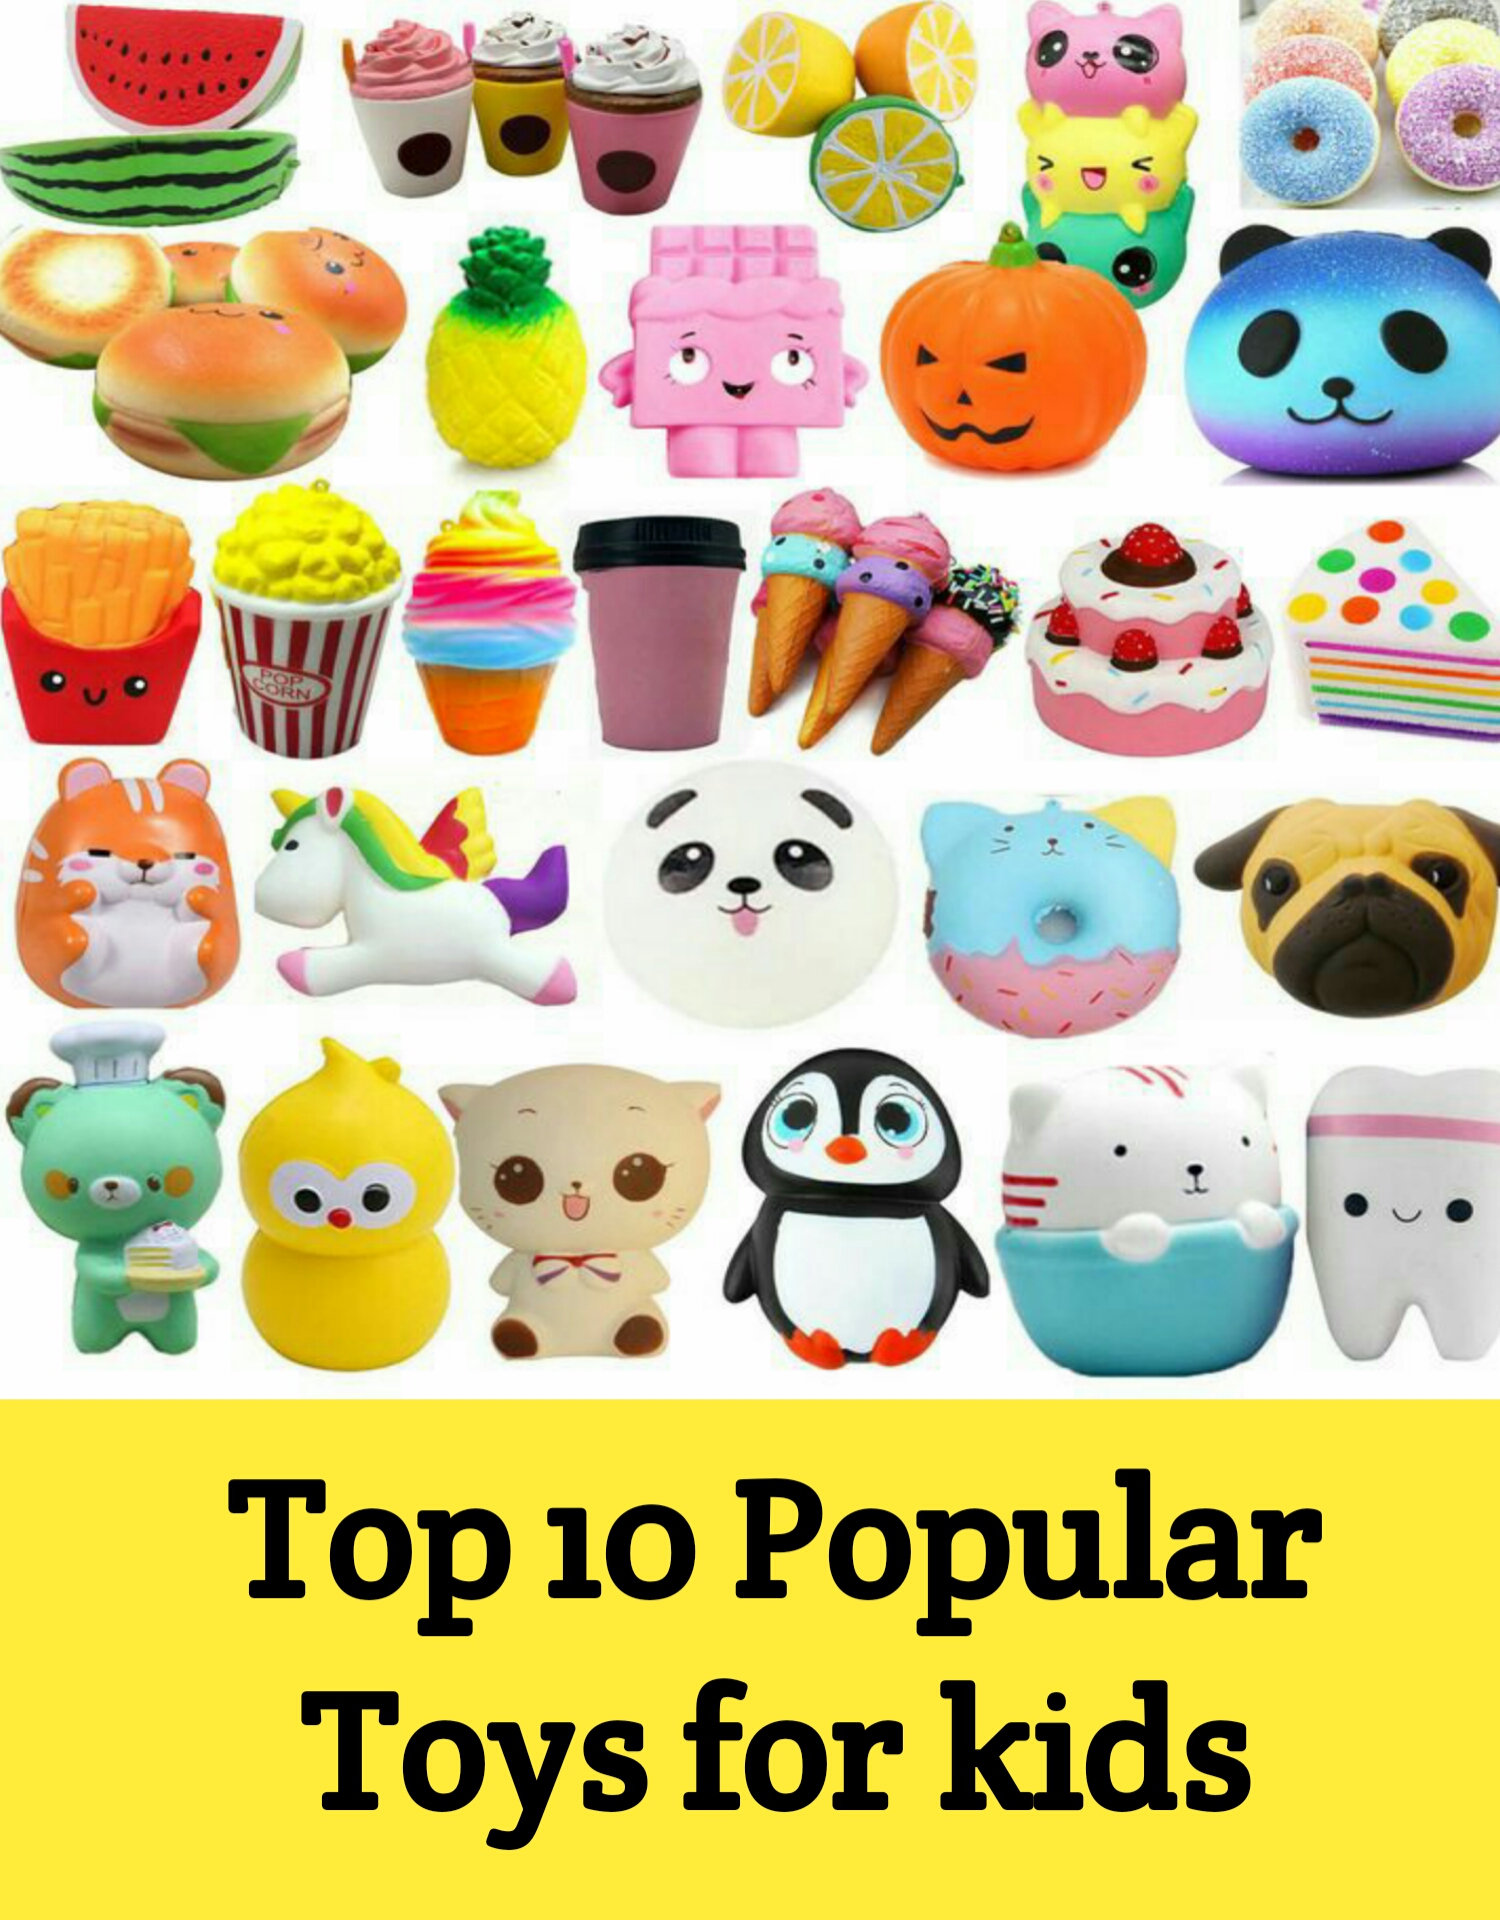 Top 10 Popular Toys for kids